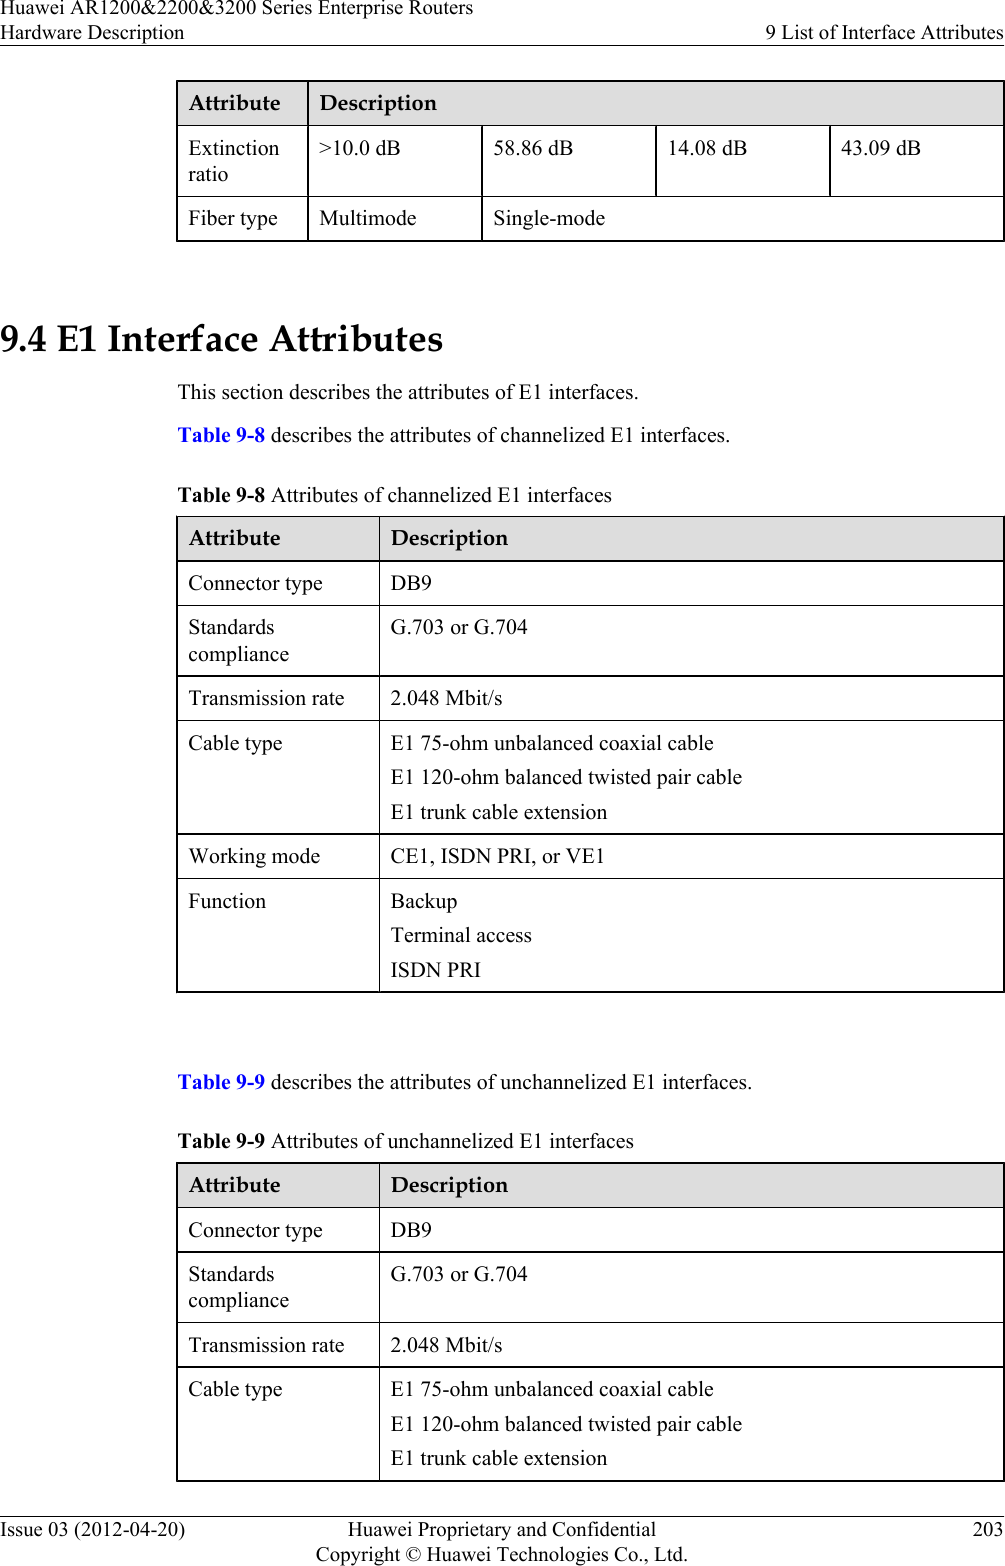 Attribute DescriptionExtinctionratio&gt;10.0 dB 58.86 dB 14.08 dB 43.09 dBFiber type Multimode Single-mode 9.4 E1 Interface AttributesThis section describes the attributes of E1 interfaces.Table 9-8 describes the attributes of channelized E1 interfaces.Table 9-8 Attributes of channelized E1 interfacesAttribute DescriptionConnector type DB9StandardscomplianceG.703 or G.704Transmission rate 2.048 Mbit/sCable type E1 75-ohm unbalanced coaxial cableE1 120-ohm balanced twisted pair cableE1 trunk cable extensionWorking mode CE1, ISDN PRI, or VE1Function BackupTerminal accessISDN PRI Table 9-9 describes the attributes of unchannelized E1 interfaces.Table 9-9 Attributes of unchannelized E1 interfacesAttribute DescriptionConnector type DB9StandardscomplianceG.703 or G.704Transmission rate 2.048 Mbit/sCable type E1 75-ohm unbalanced coaxial cableE1 120-ohm balanced twisted pair cableE1 trunk cable extensionHuawei AR1200&amp;2200&amp;3200 Series Enterprise RoutersHardware Description 9 List of Interface AttributesIssue 03 (2012-04-20) Huawei Proprietary and ConfidentialCopyright © Huawei Technologies Co., Ltd.203